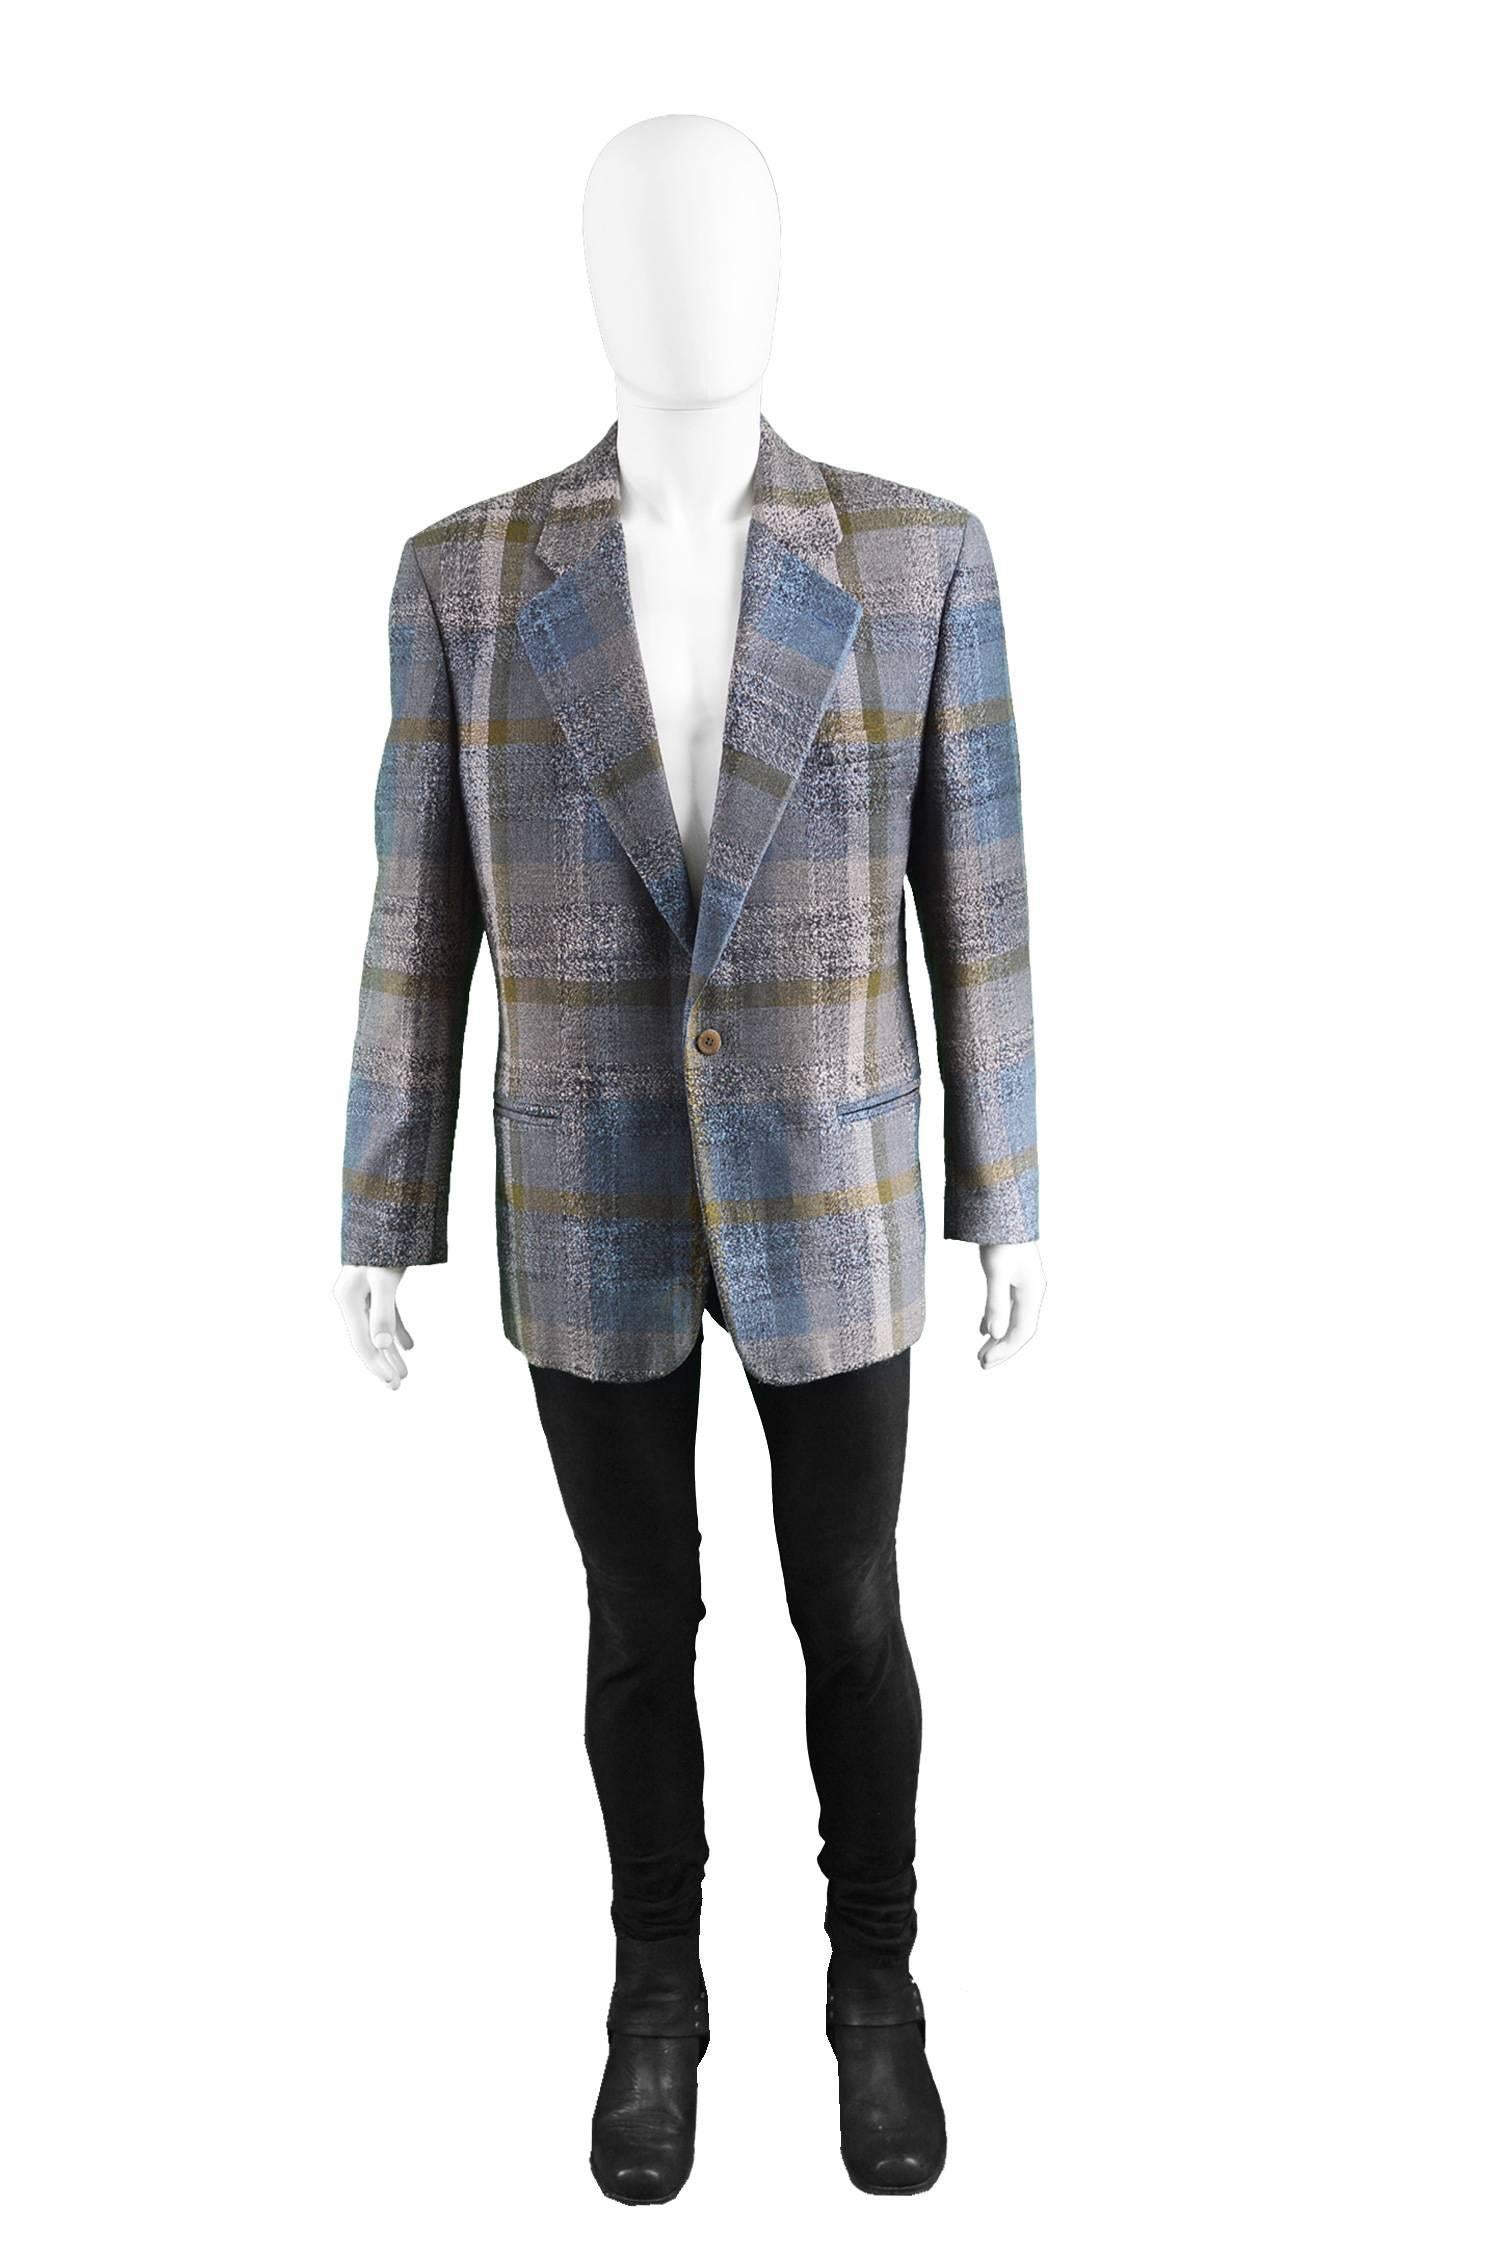 Umberto Ginocchietti Vintage Men's Wool Plaid Tweed Blazer, 1980s

Size: Marked 48 which is rougly a men’s Small to Medium. Please check all measurements. 
Chest - 42” / 106cm (Please allow a couple of inches room for movement)
Length (Shoulder to